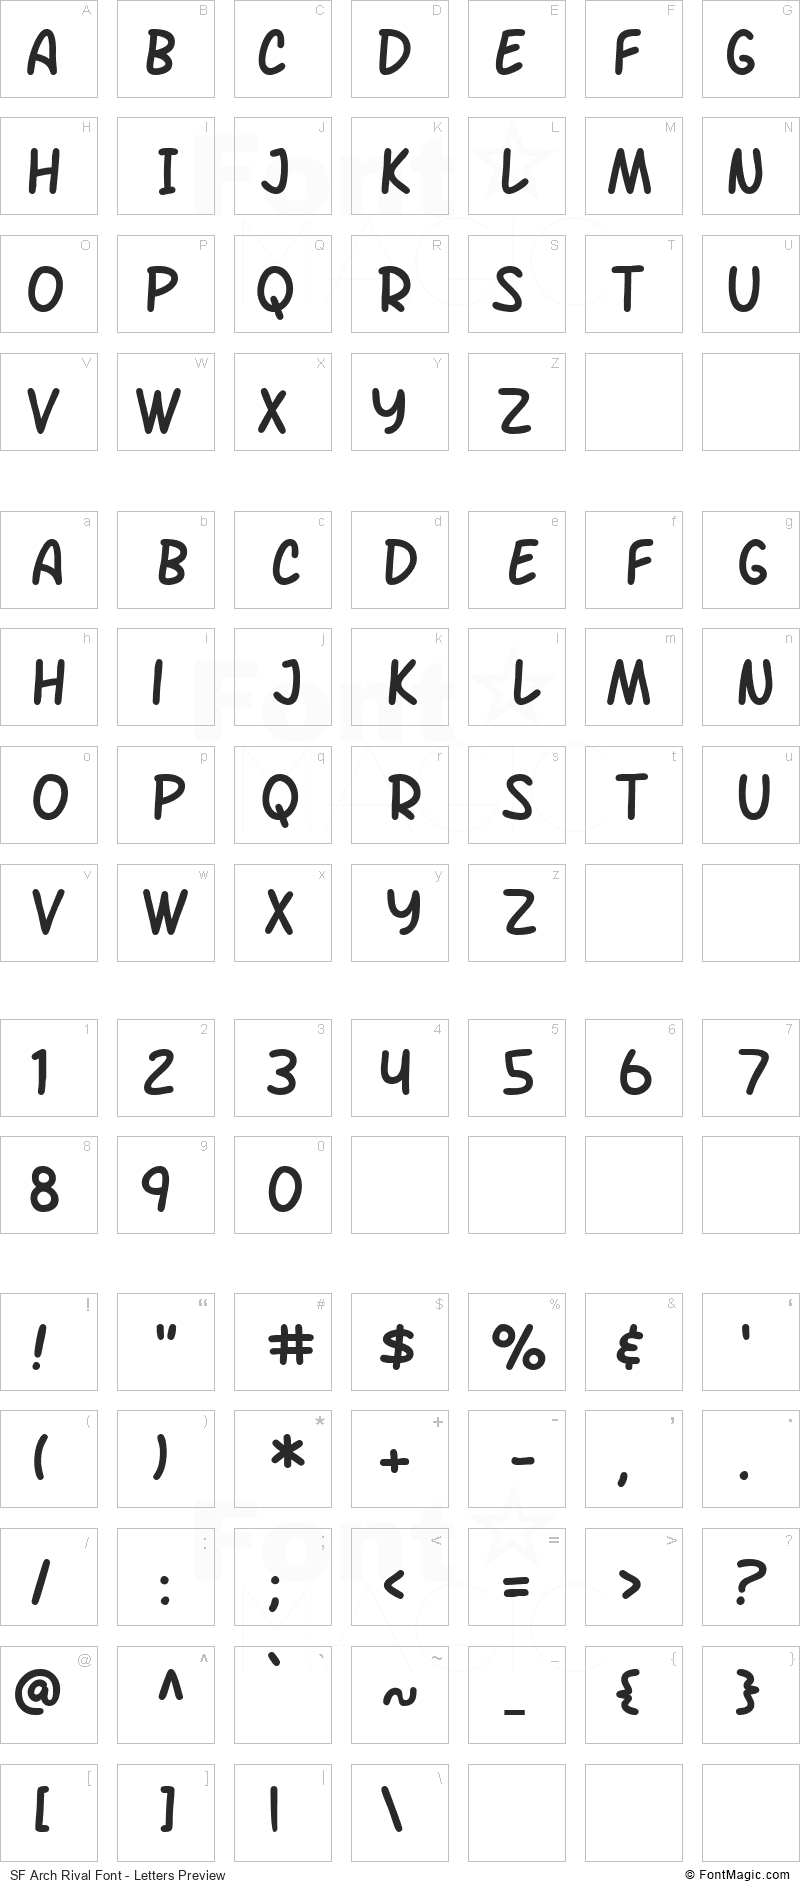 SF Arch Rival Font - All Latters Preview Chart